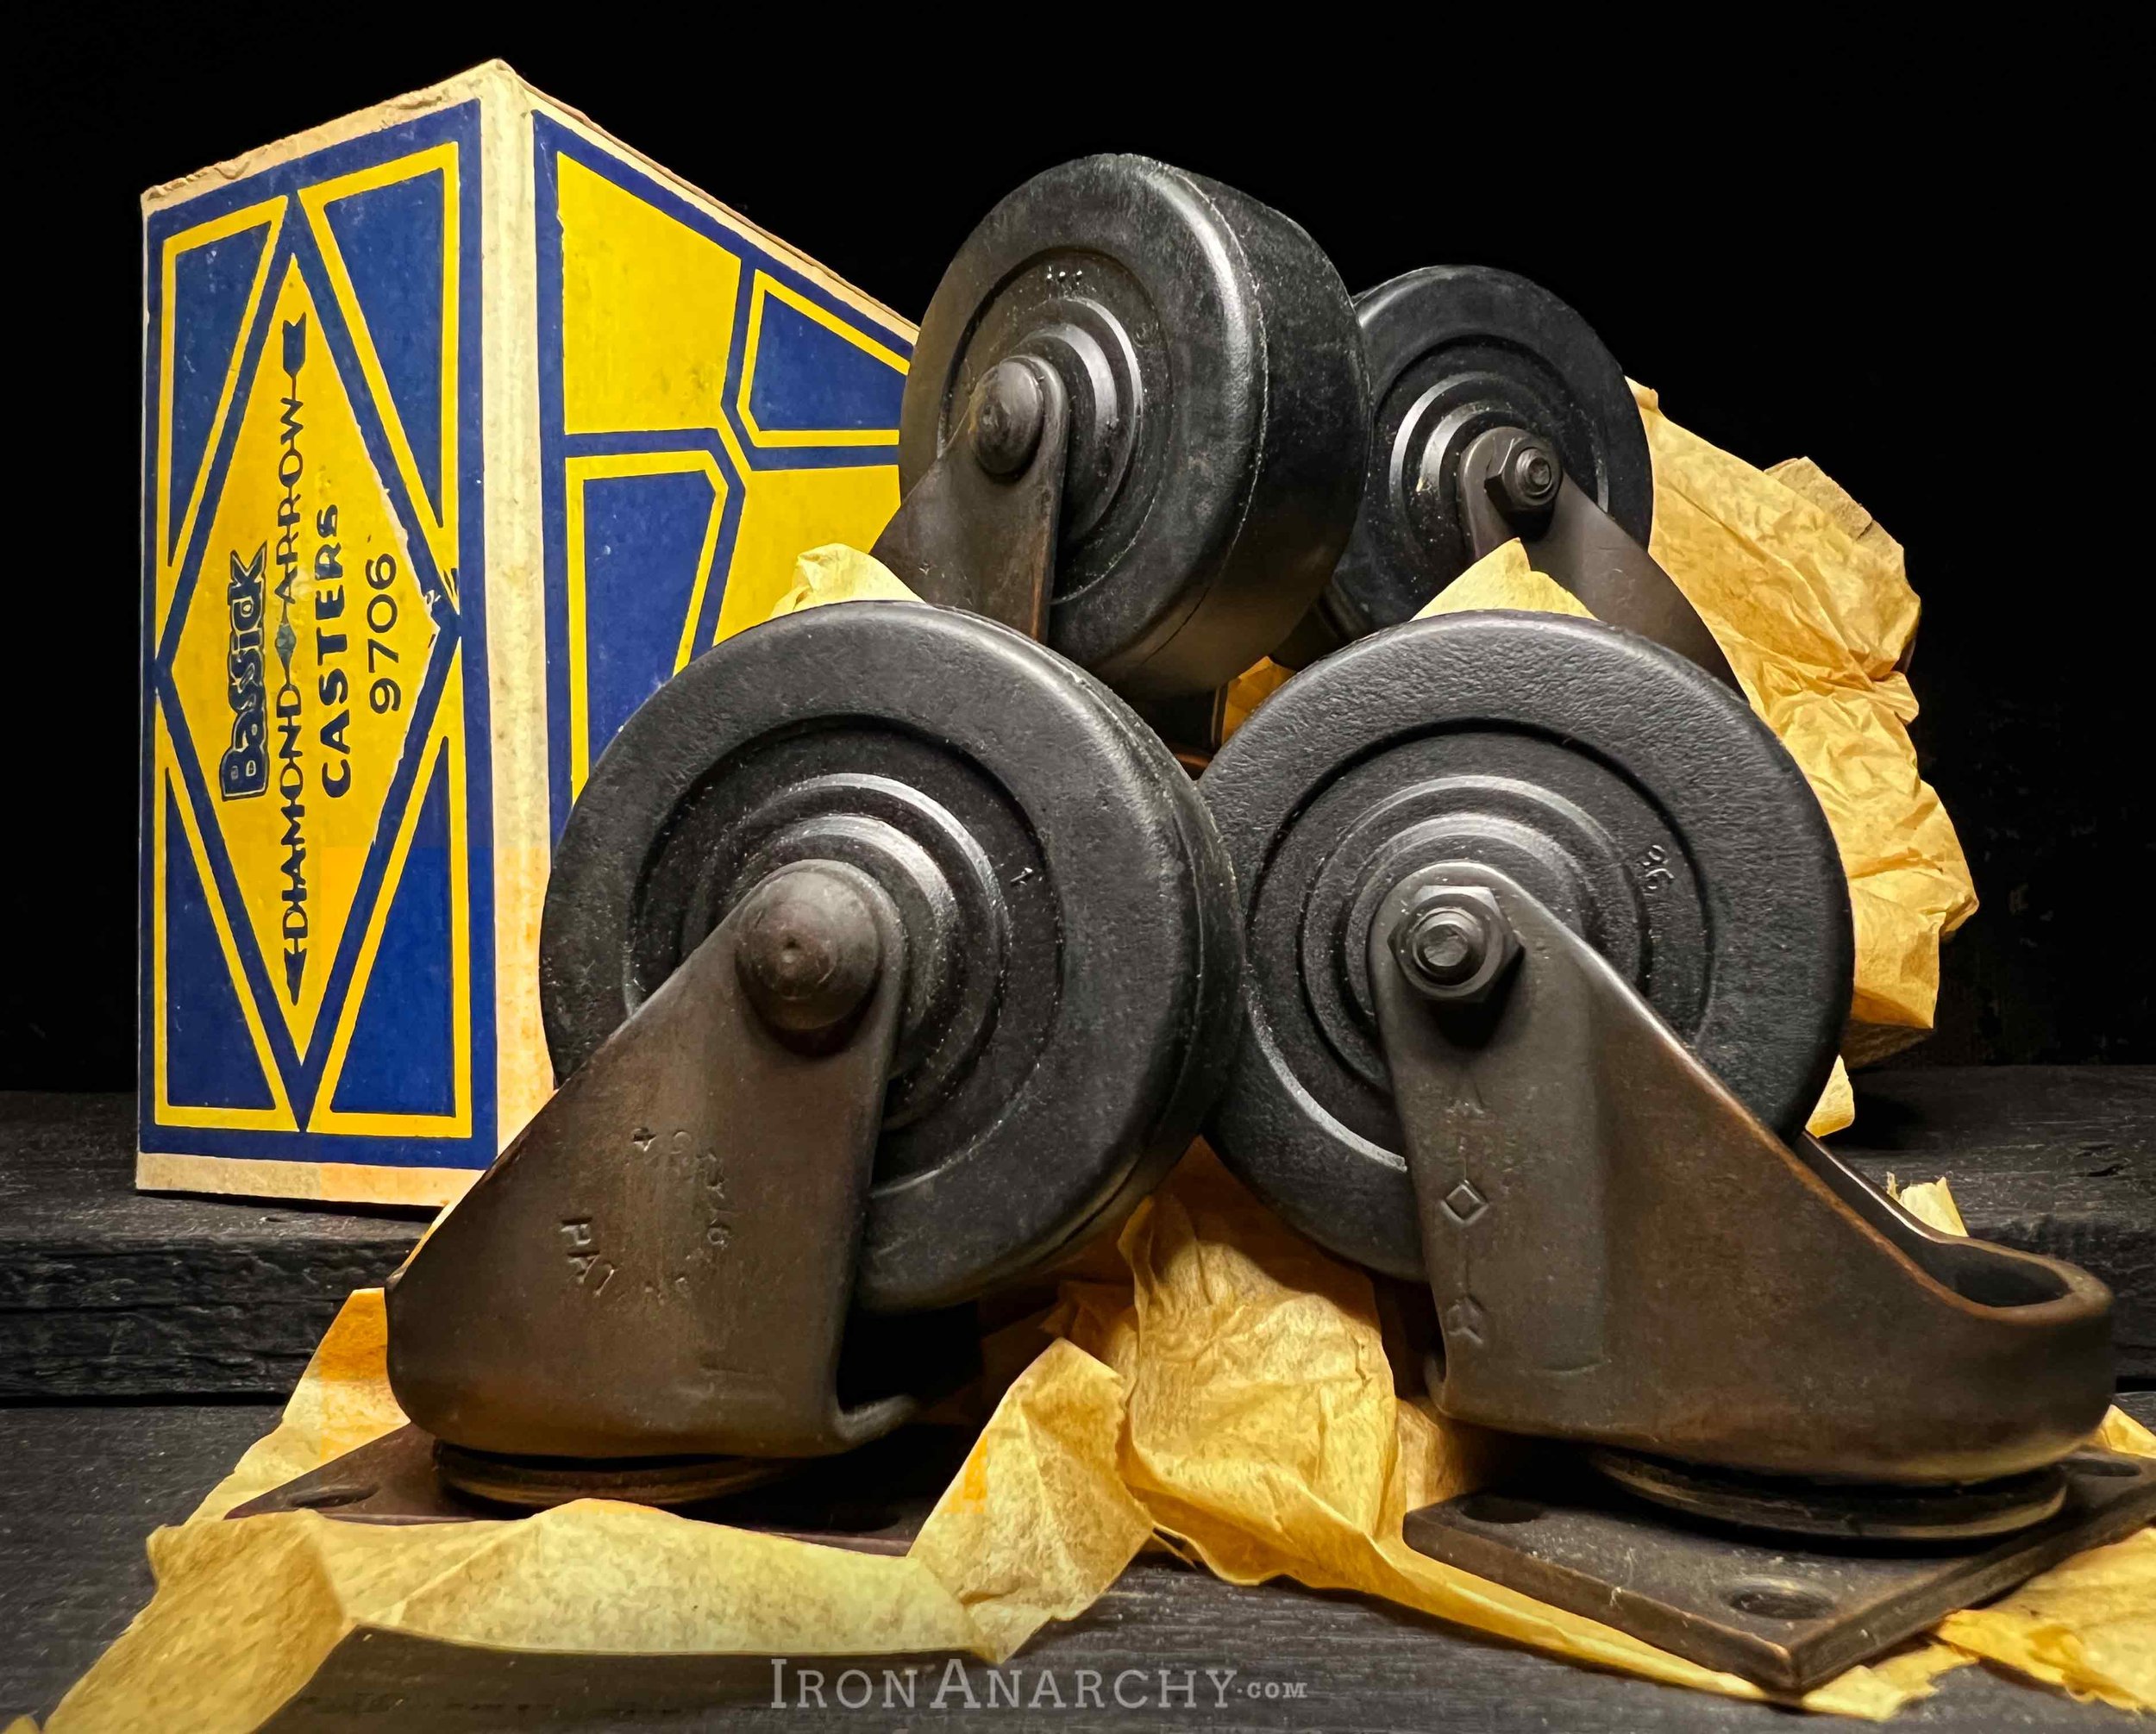 Antique Furniture Casters from Iron Anarchy